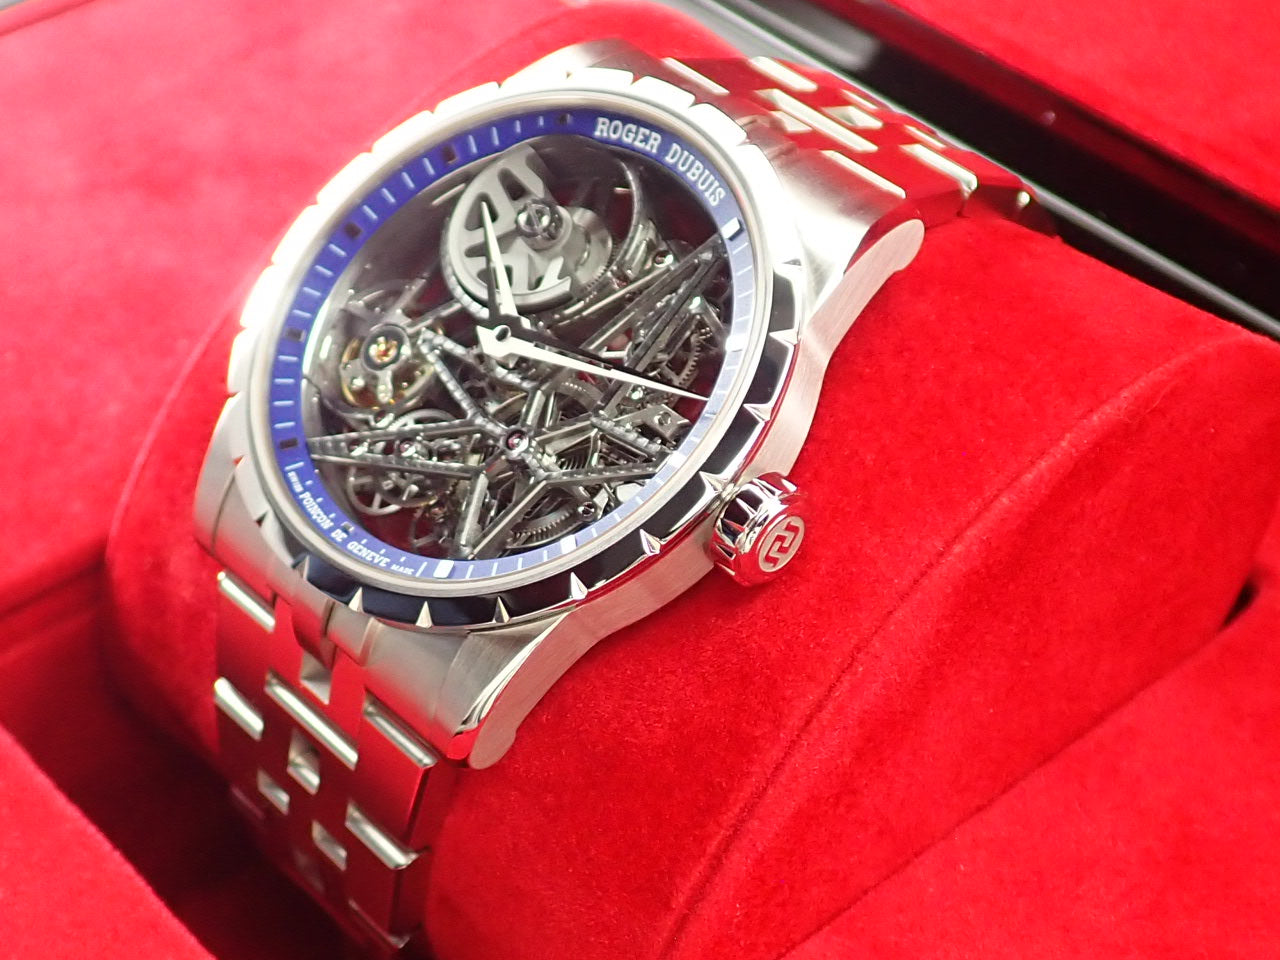 Roger Dubuis Excalibur Automatic Skeleton Japan Limited &lt;Warranty Box and Others&gt;